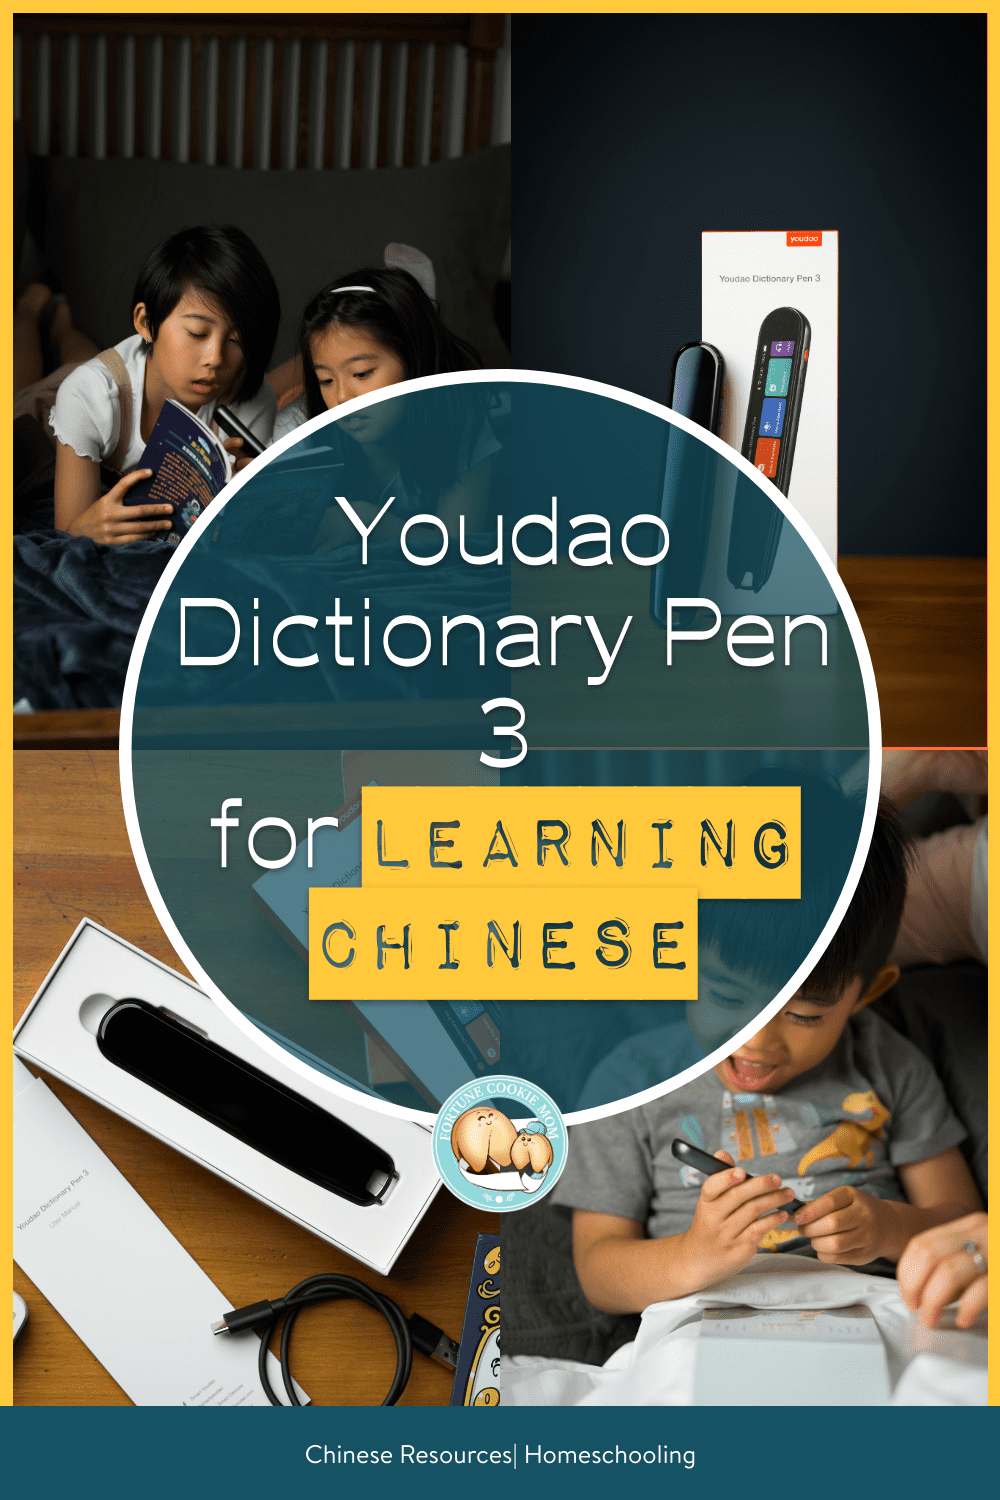 youdao dictionary pen 3 for learning Chinese